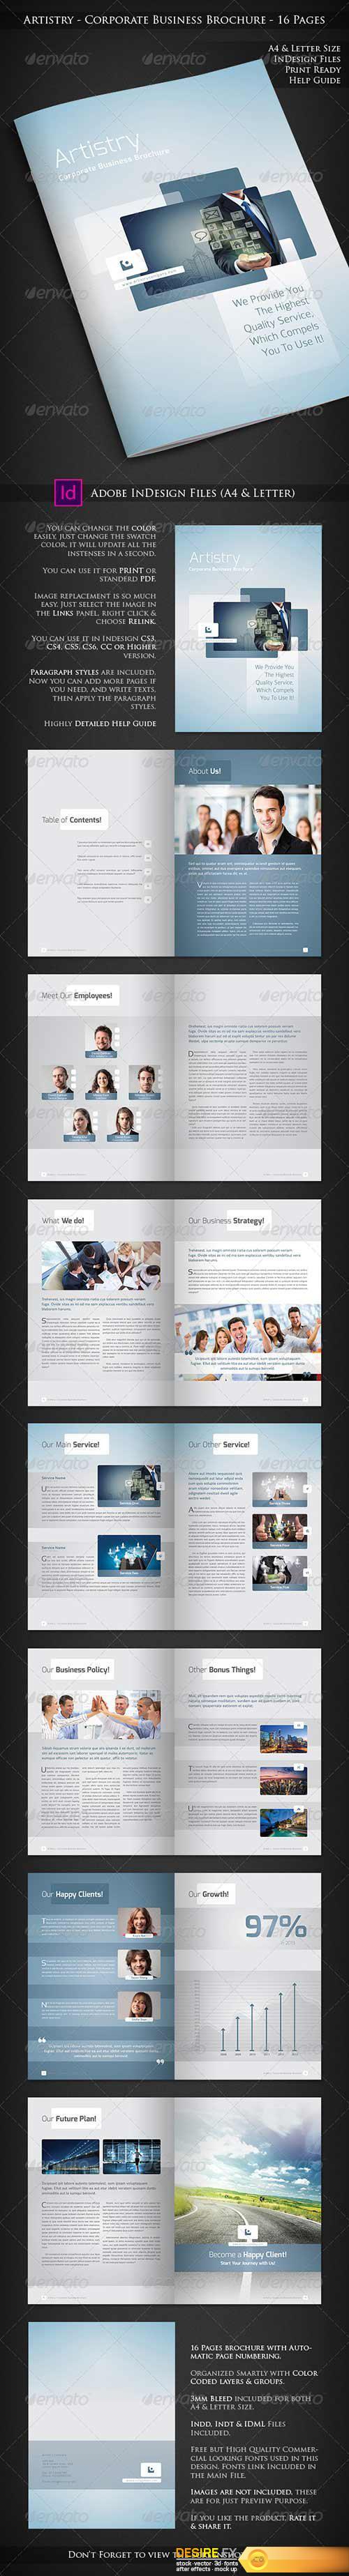 Graphicriver - Artistry - Corporate Business Brochure - 16 Pages 6981445